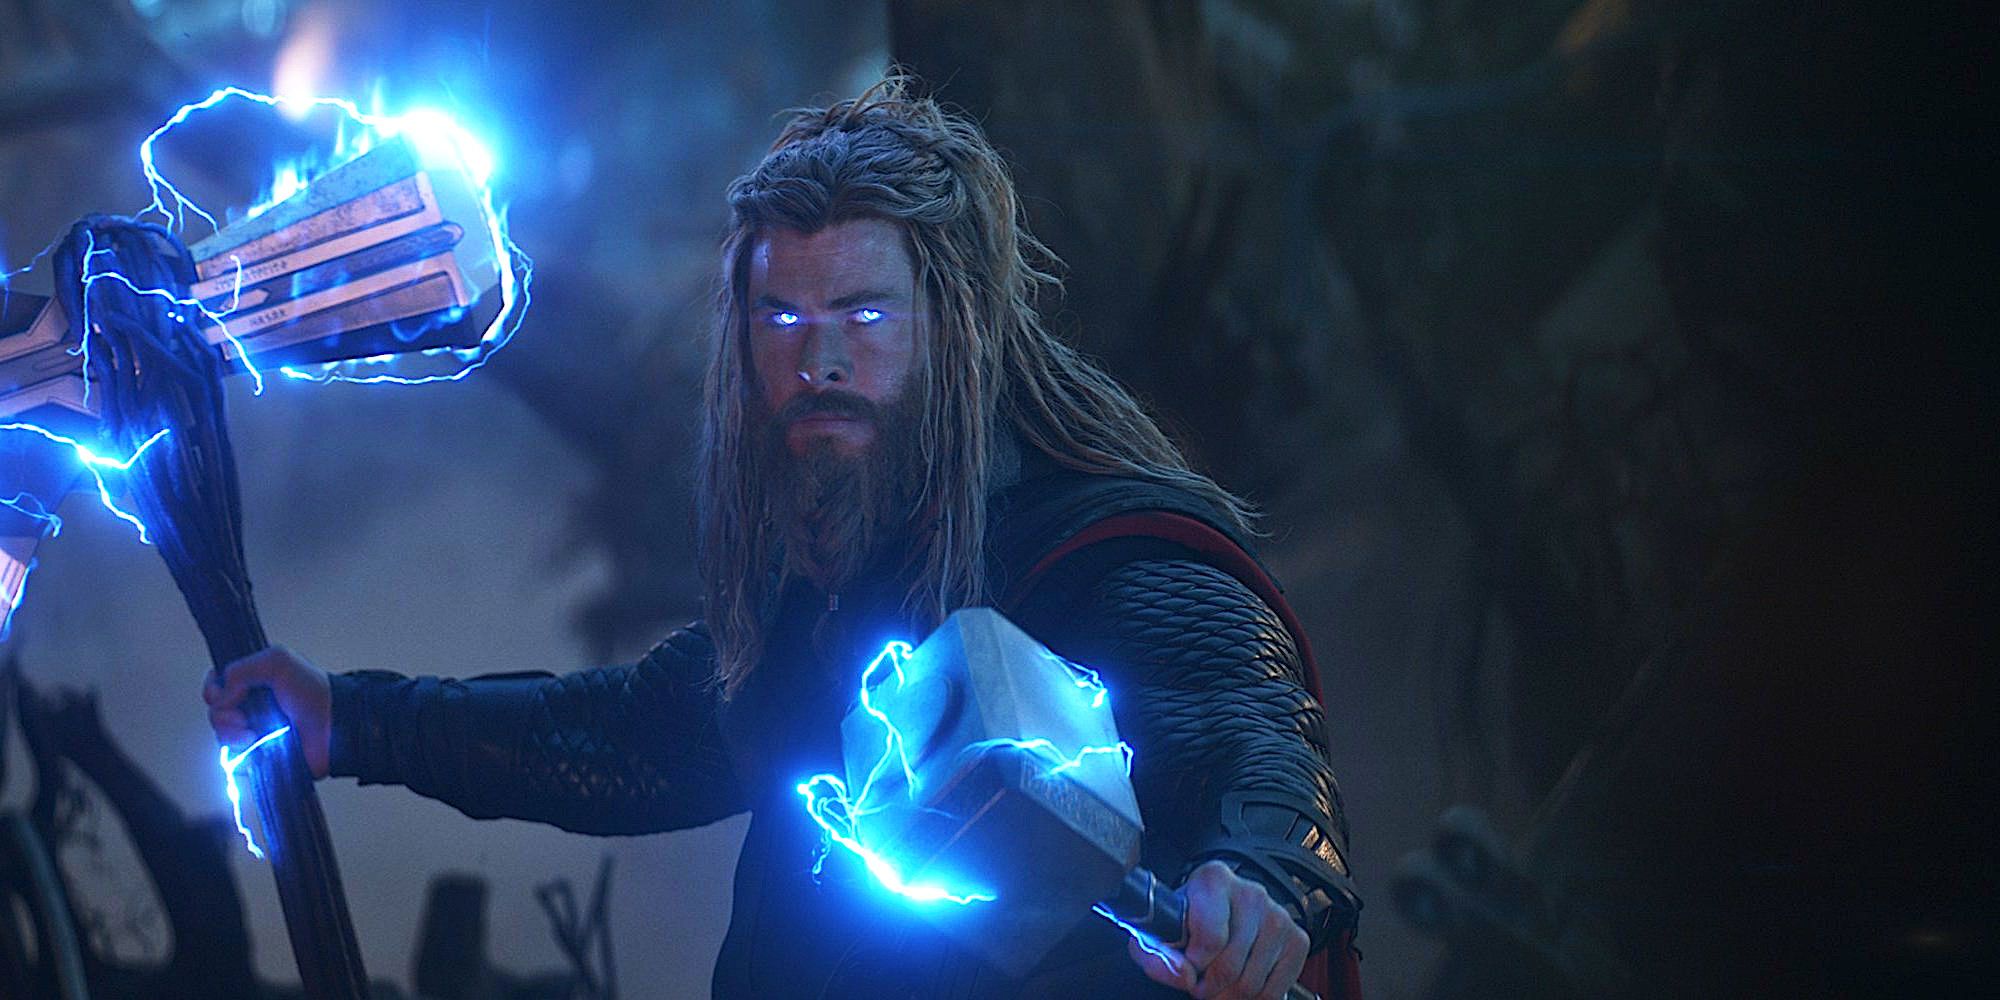 10 Questions We Have About The MCU That Thor 4 Could Resolve